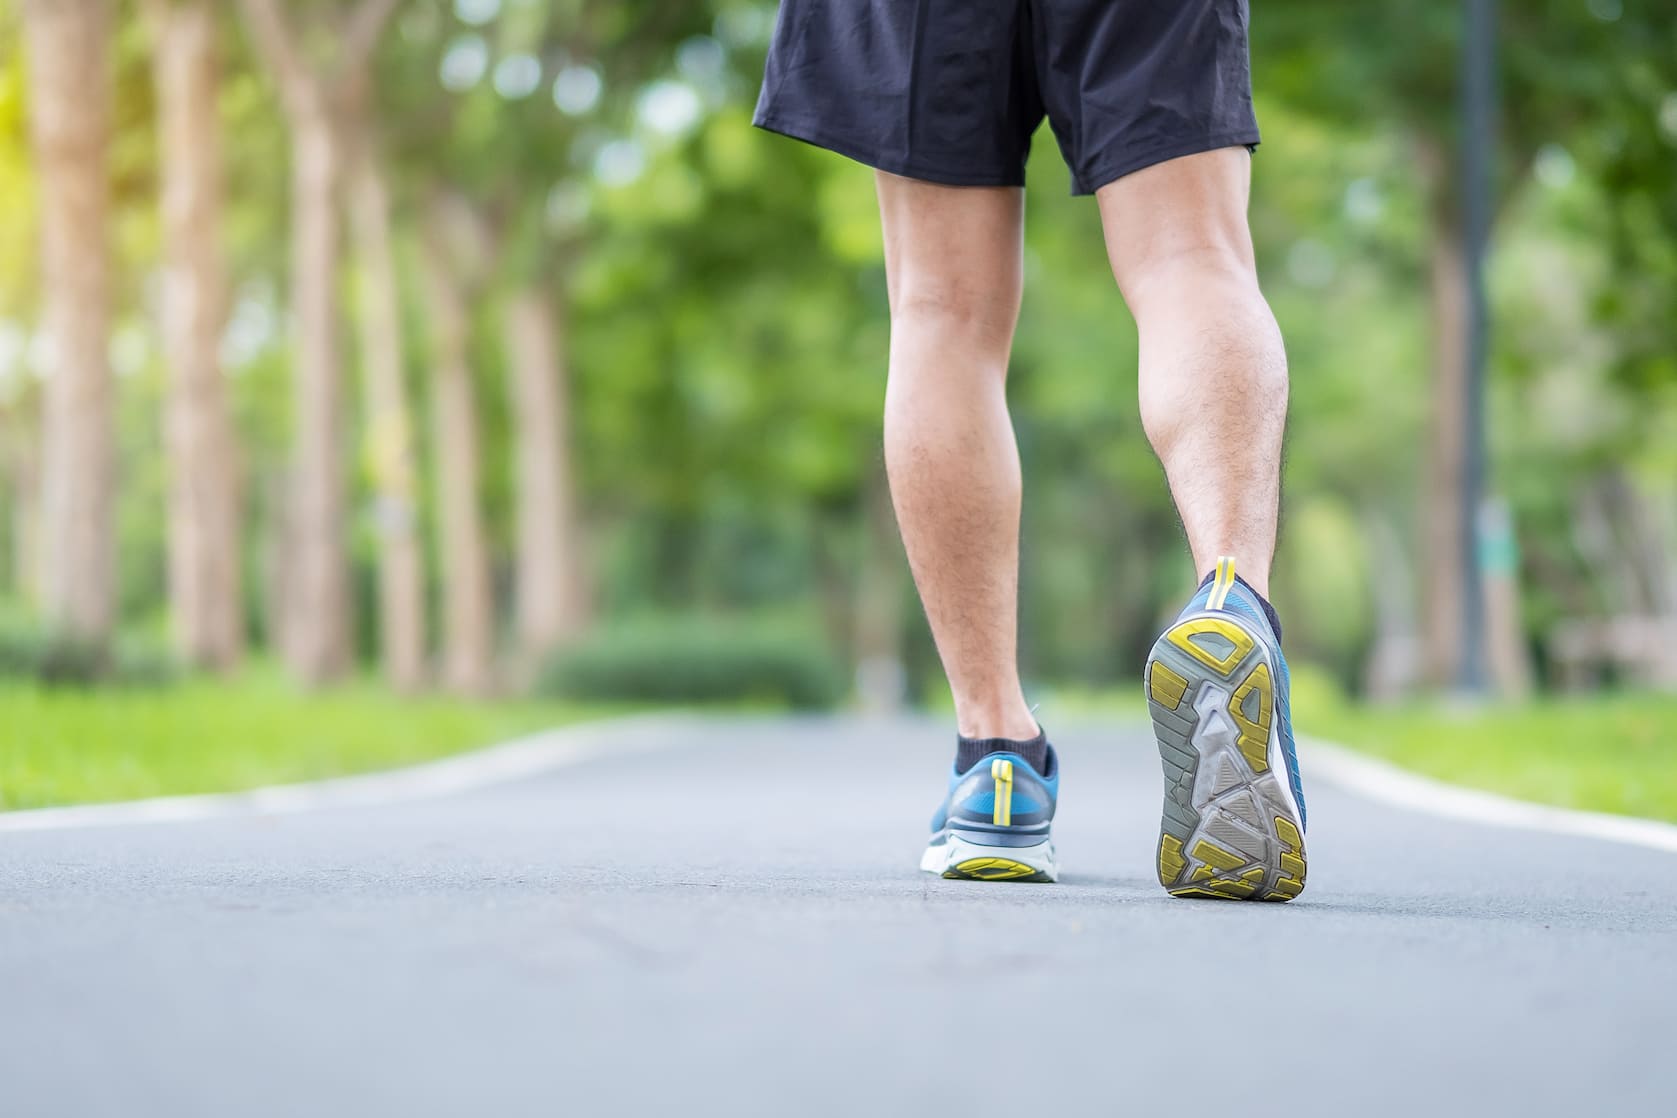 calf implants transforming your leg shape and boosting your confidence